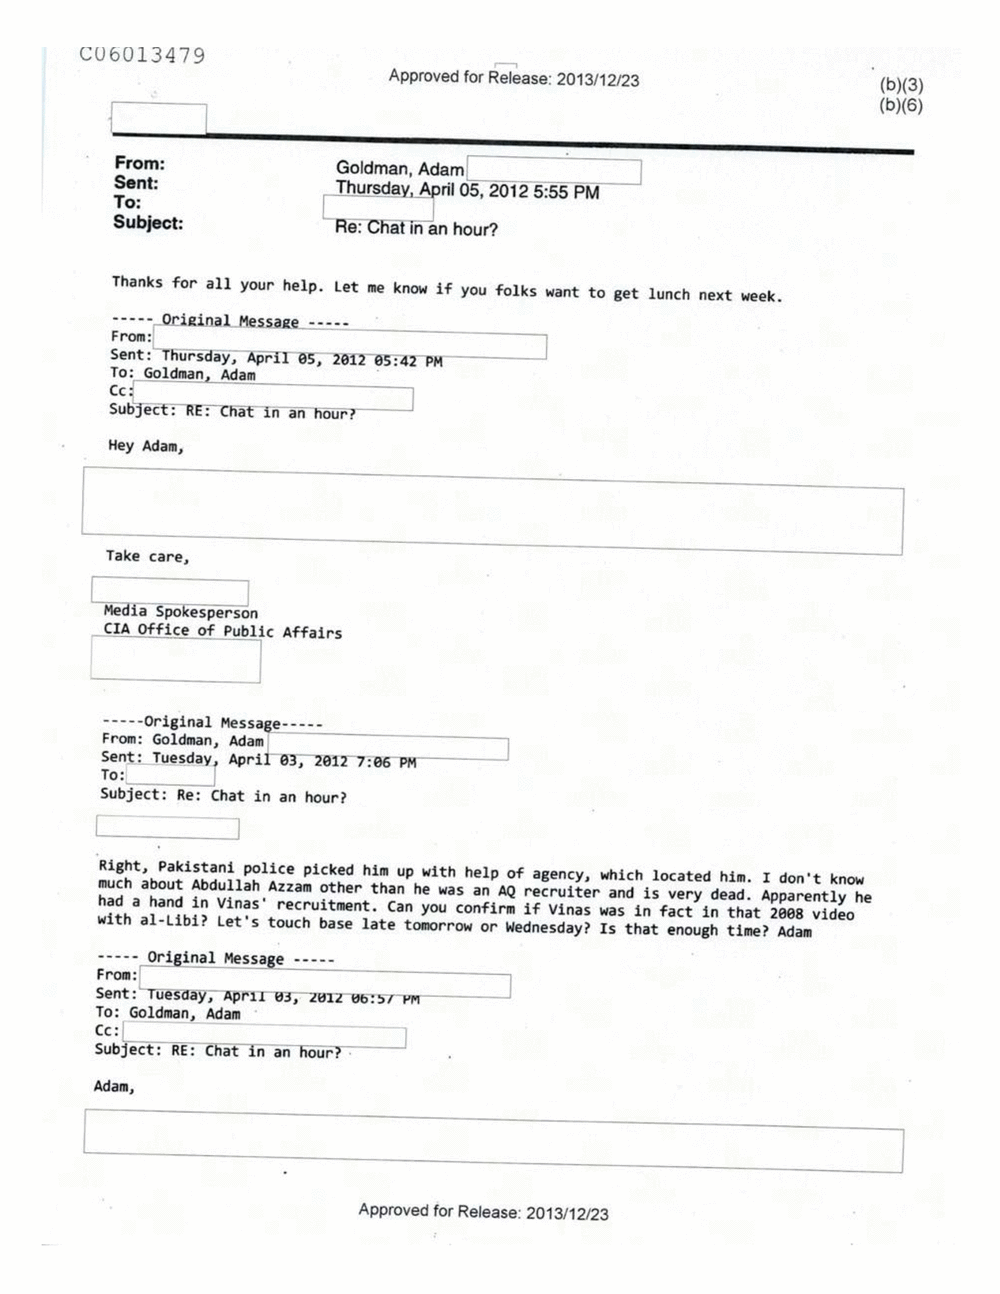 Page 329 from Email Correspondence Between Reporters and CIA Flacks